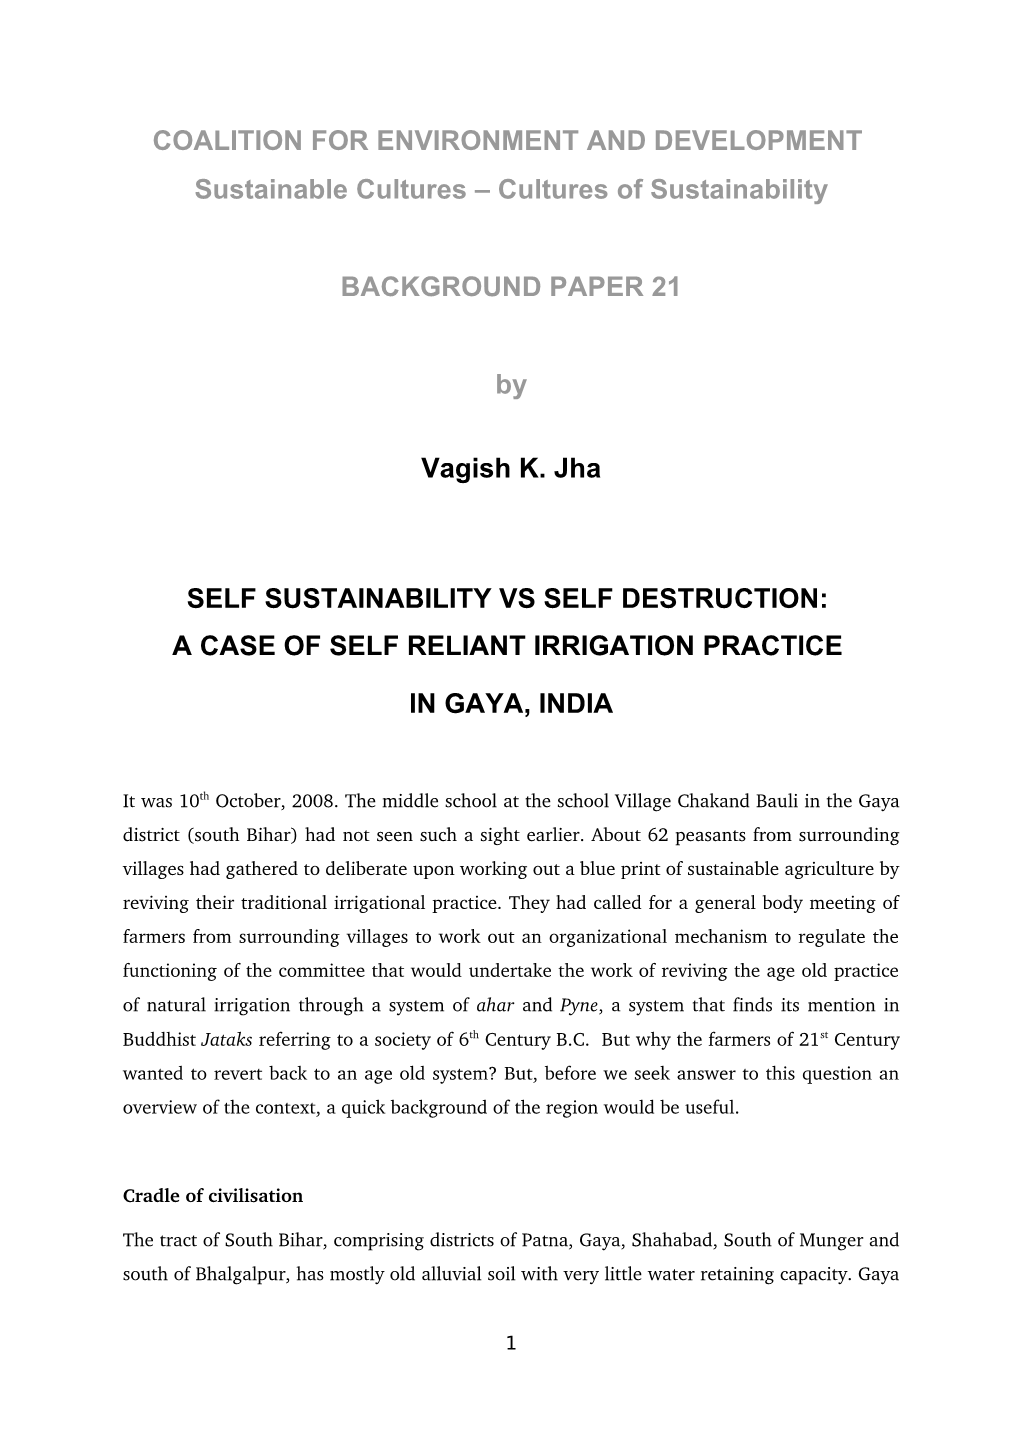 A Case of Self Reliant Irrigation Practice in Gaya